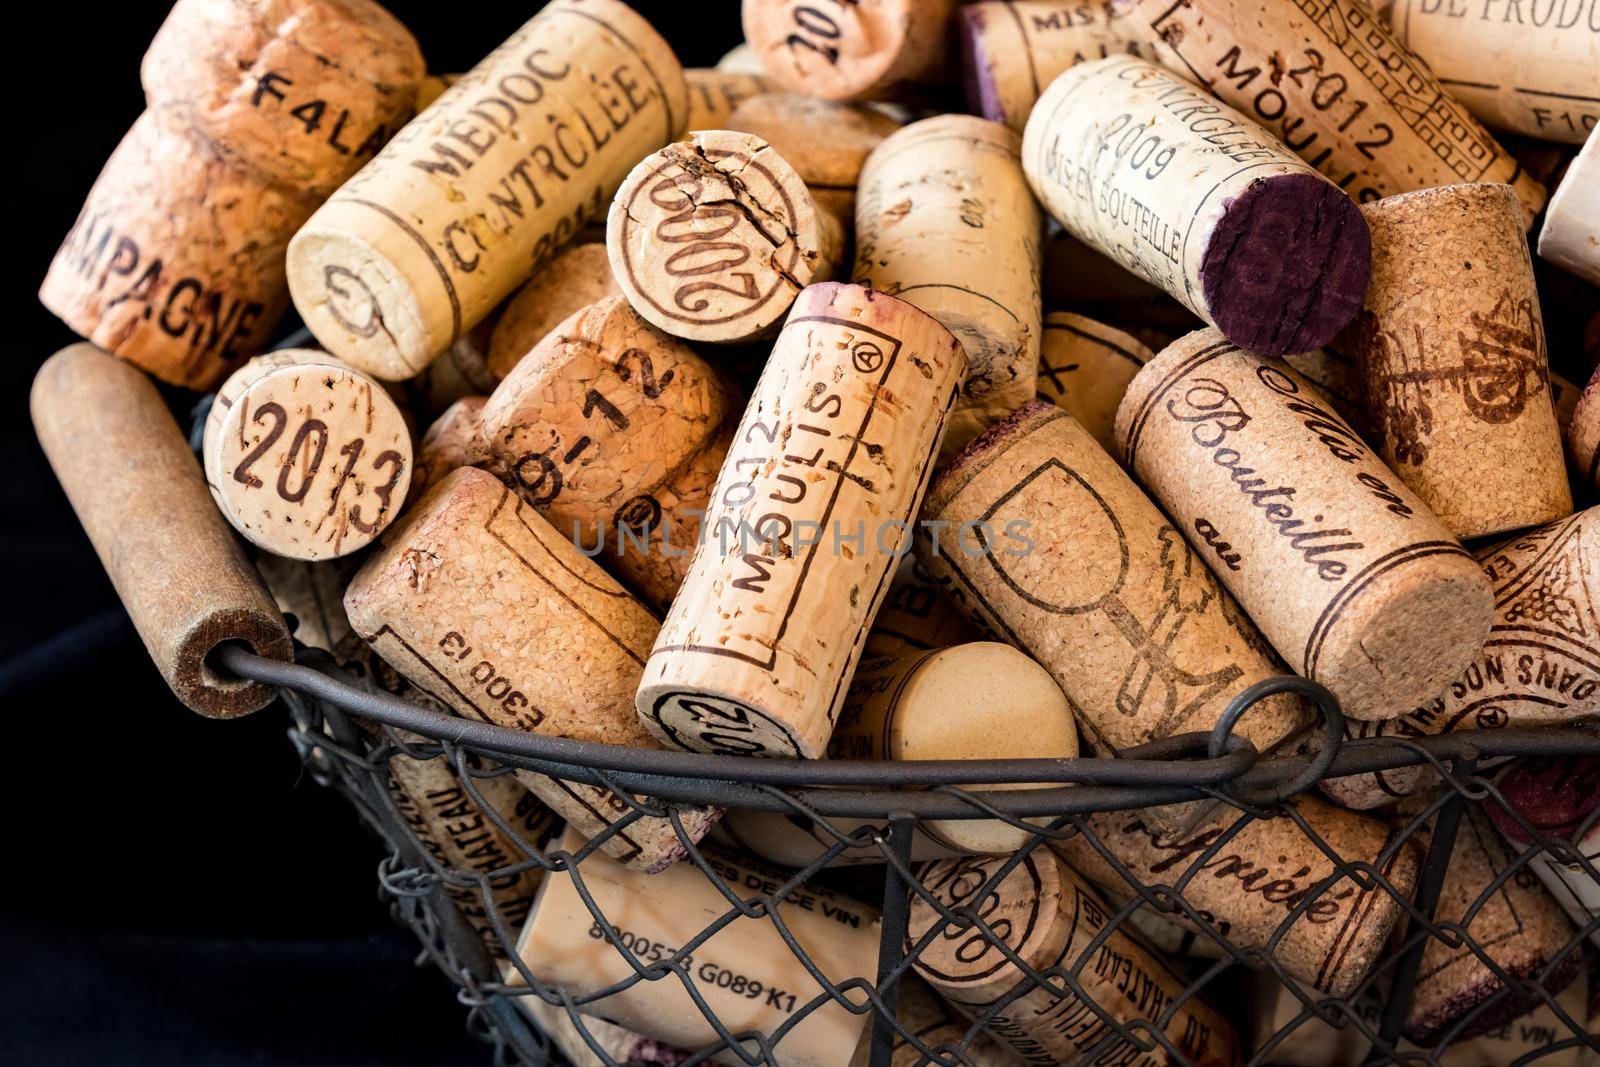 old cork stoppers of French wines in a wire basket